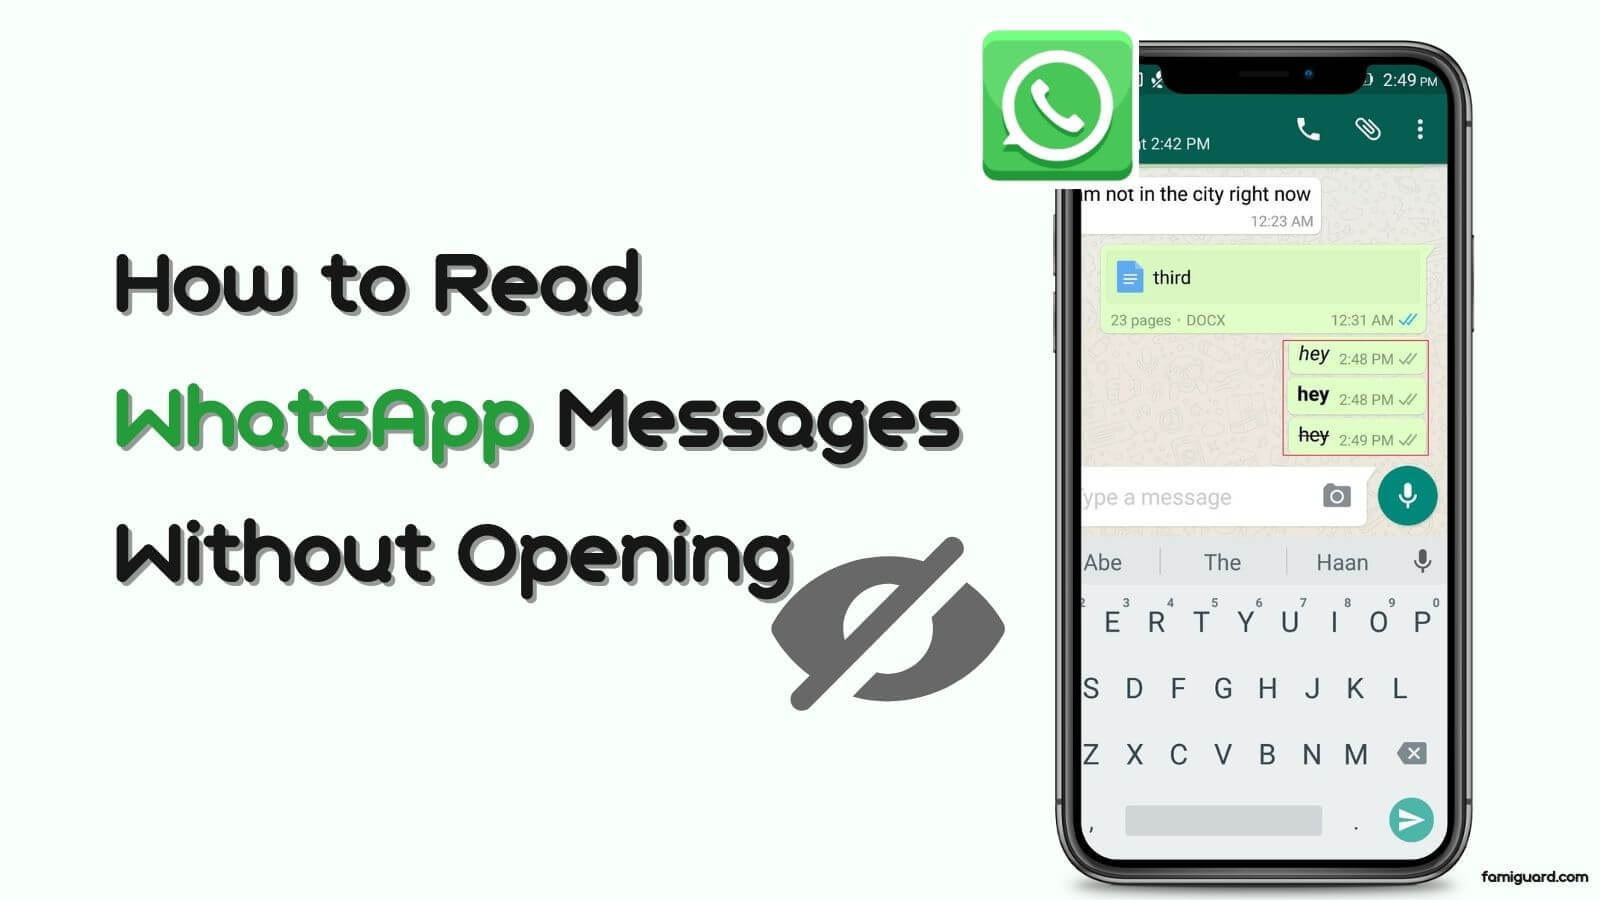 -How to Read WhatsApp Messages without Opening